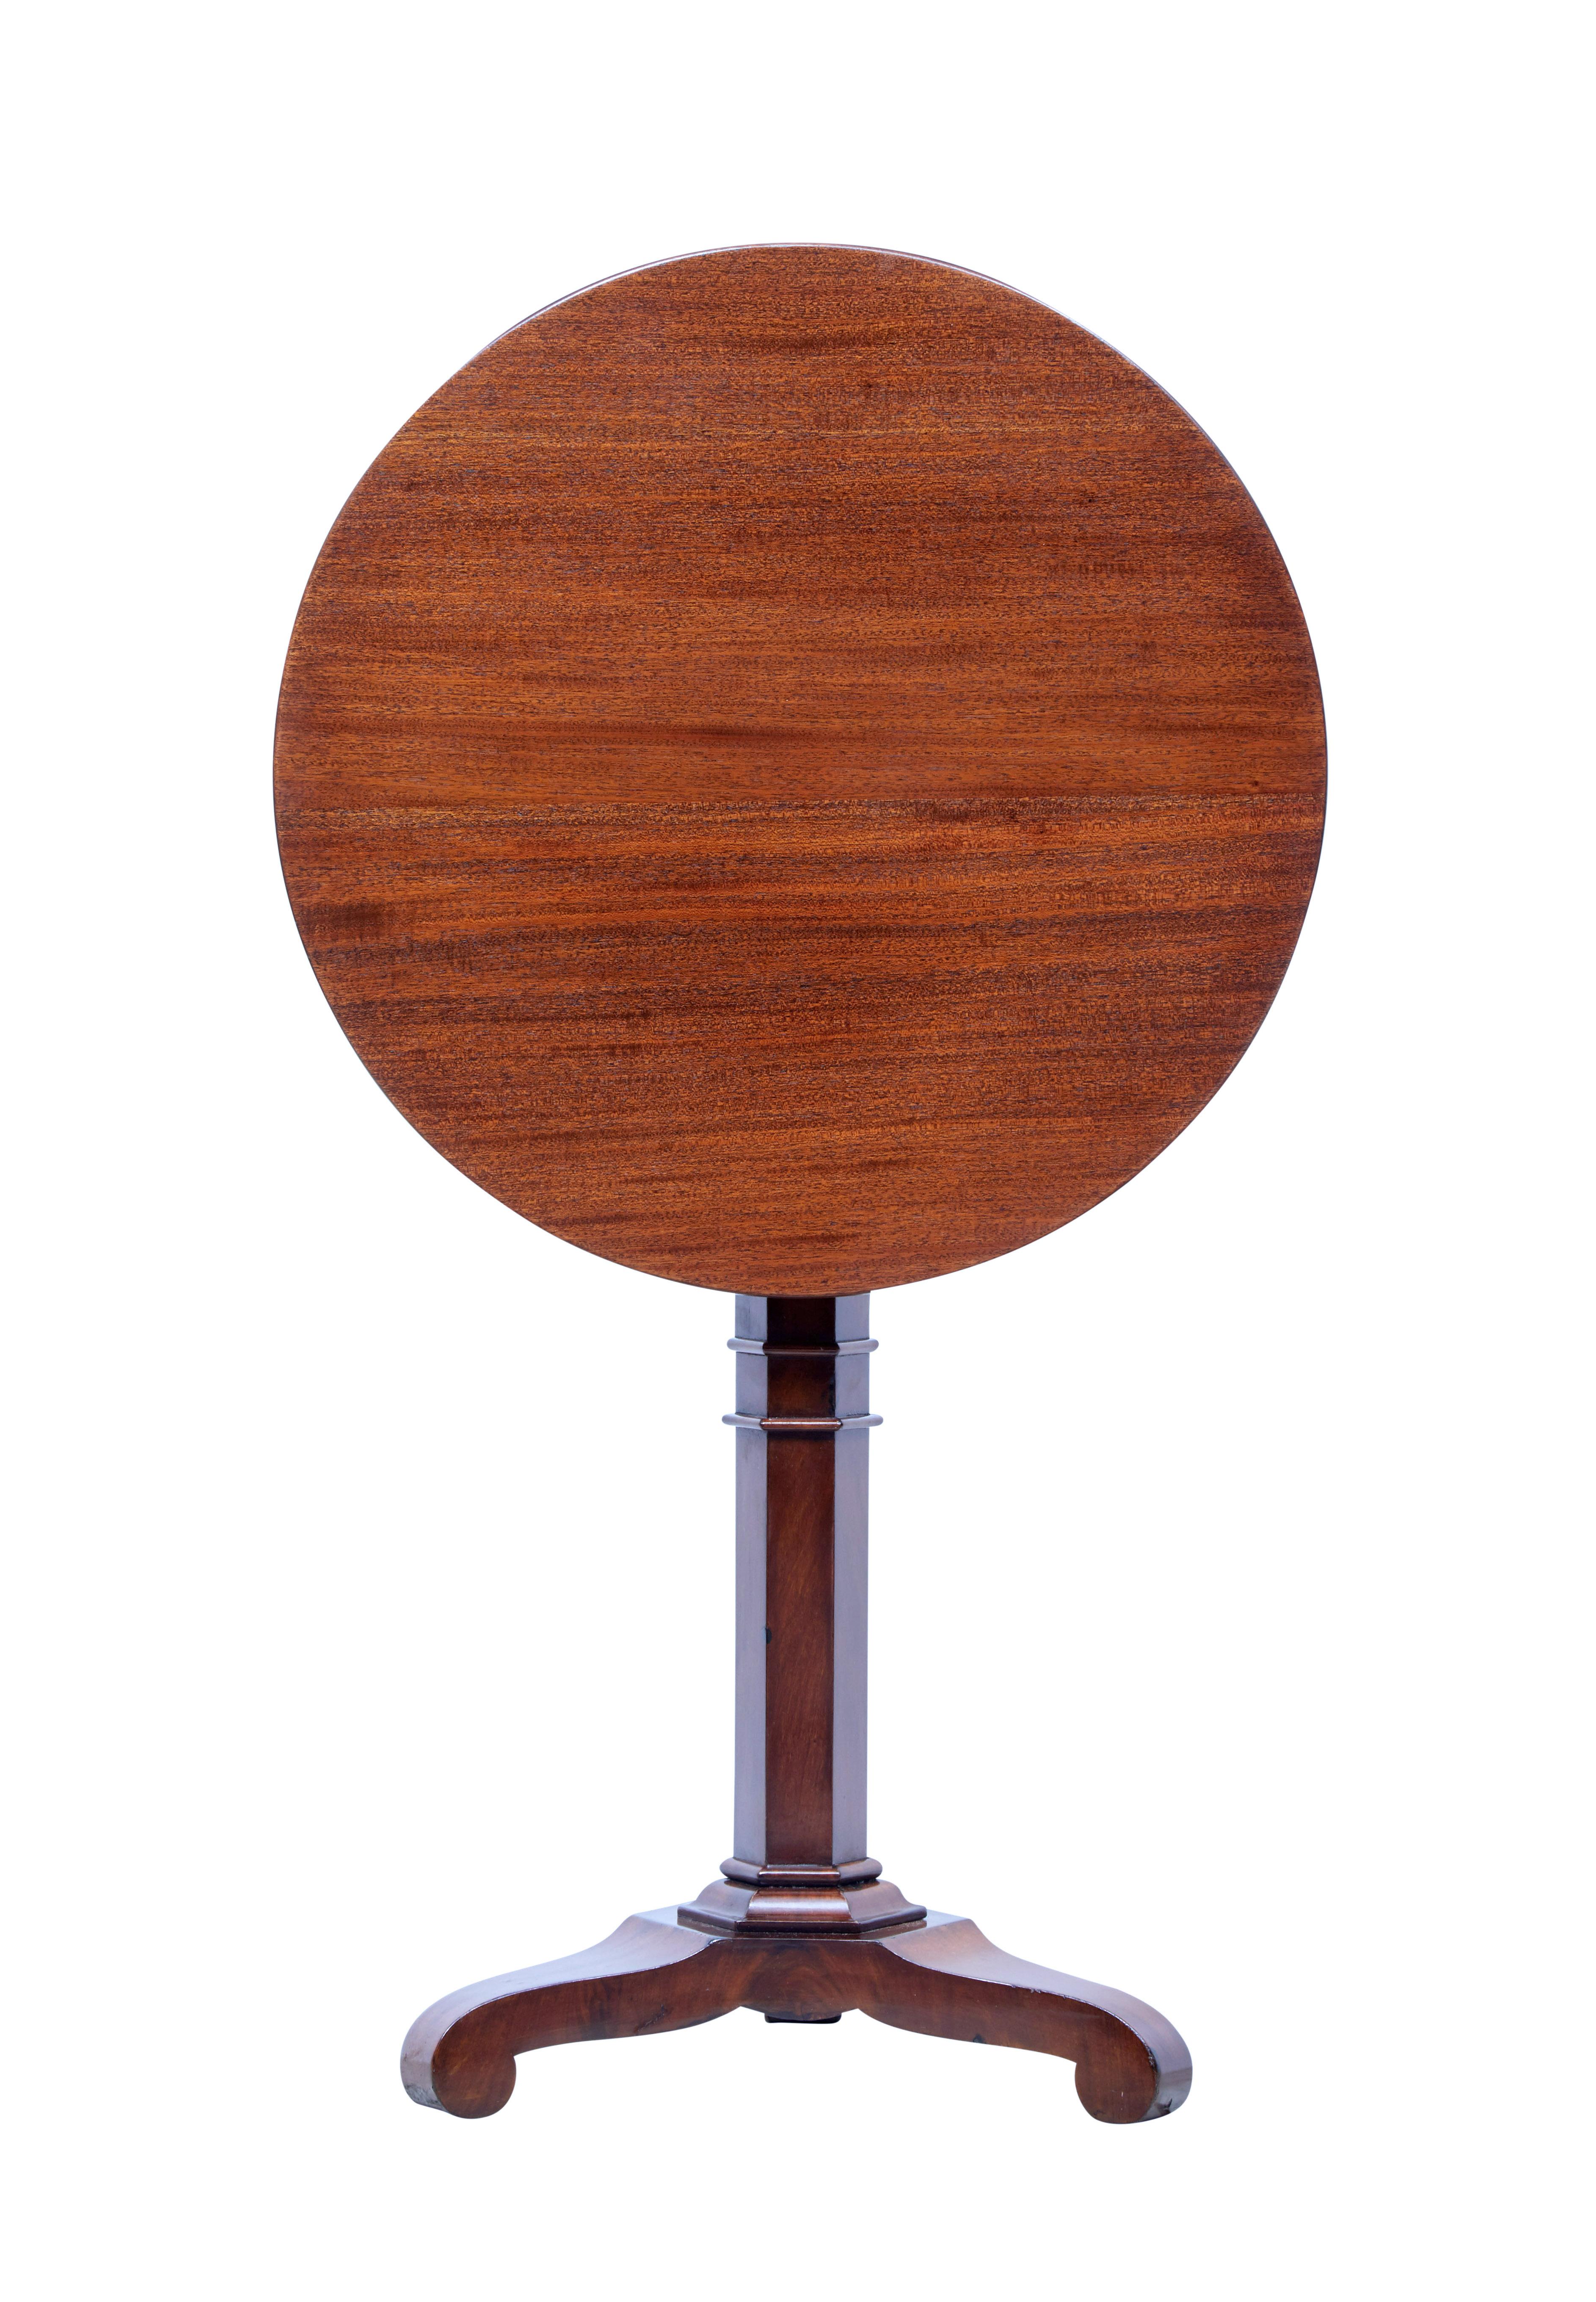 Elegant round Danish mahogany occasional table, circa 1850.

Re-polished circular top, tilting top which is secured by peg. Supported by hexagonal stem and standing on triform base with scrolled feet.

Minor surface marks.